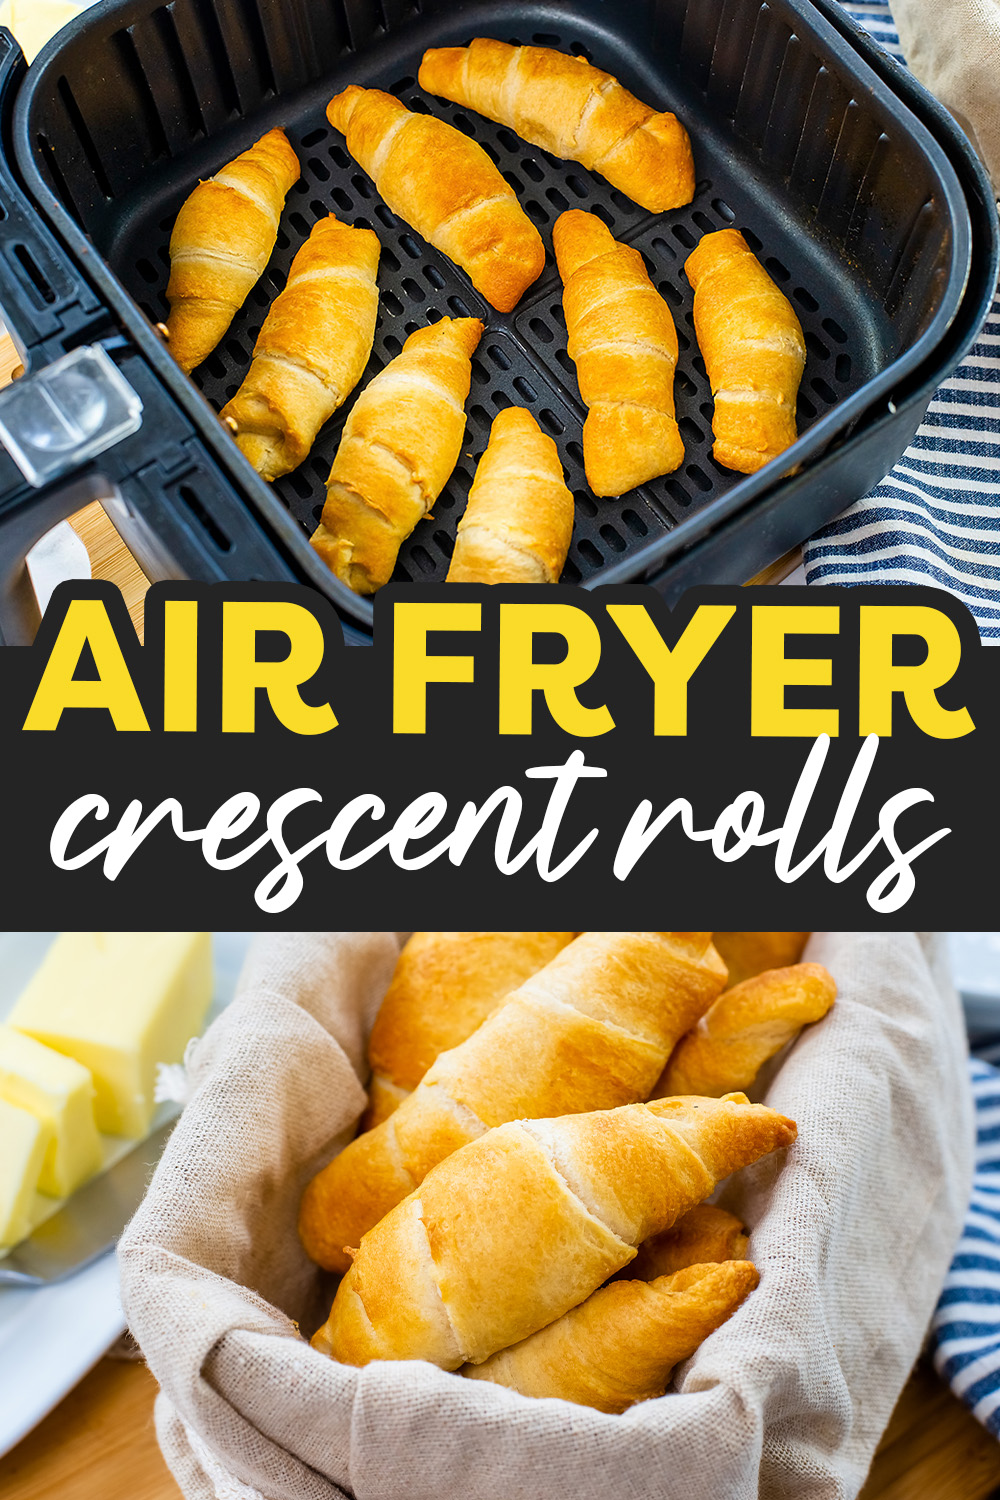 These mouthwatering air fryer crescent rolls are a perfect addition to any meal!  Serve them with breakfast, lunch, or dinner! Ready in 6 minutes!